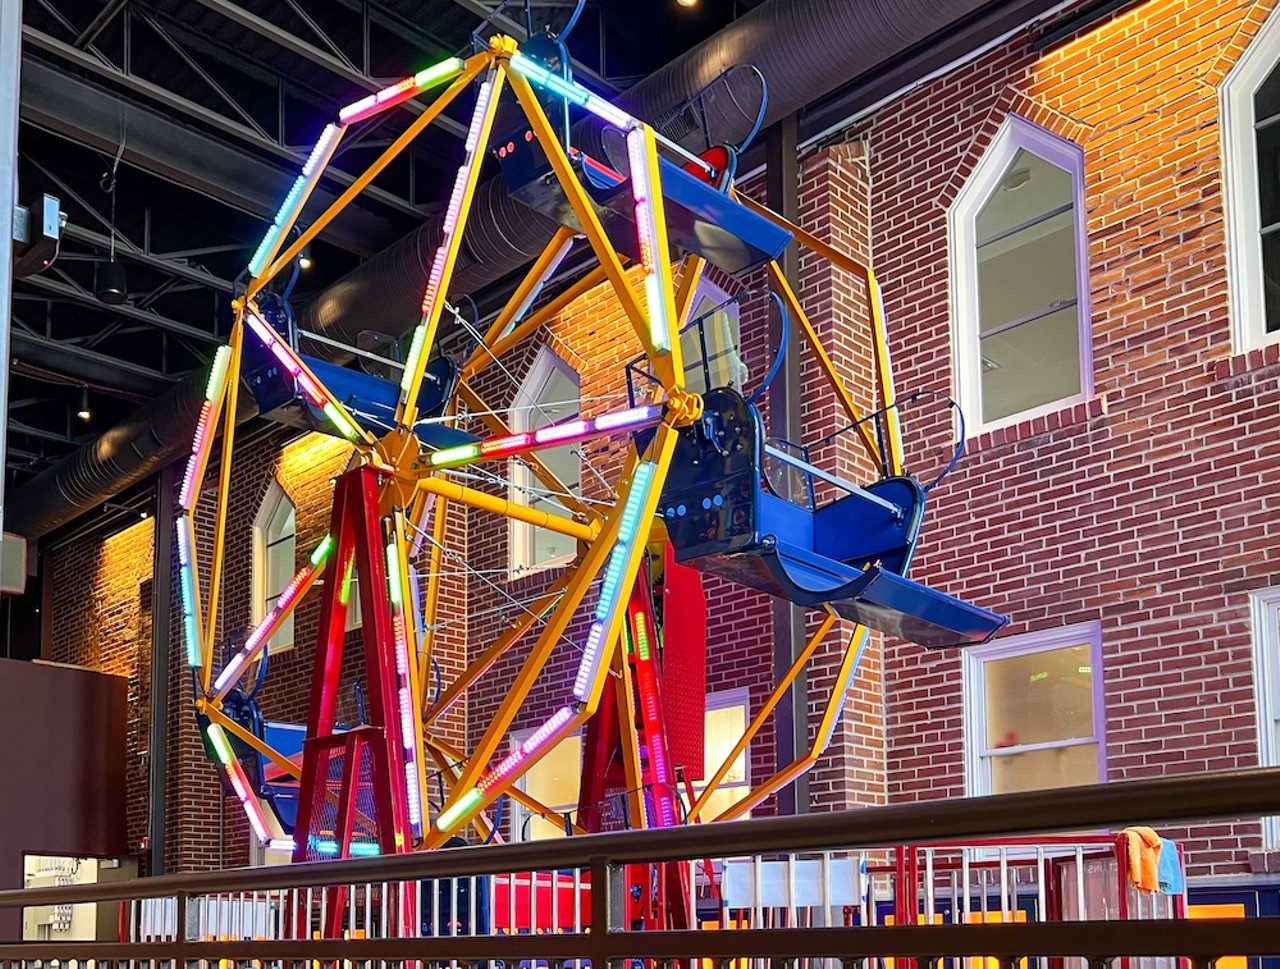 The mini Ferris wheel came from the Muny — and yes, it really works.